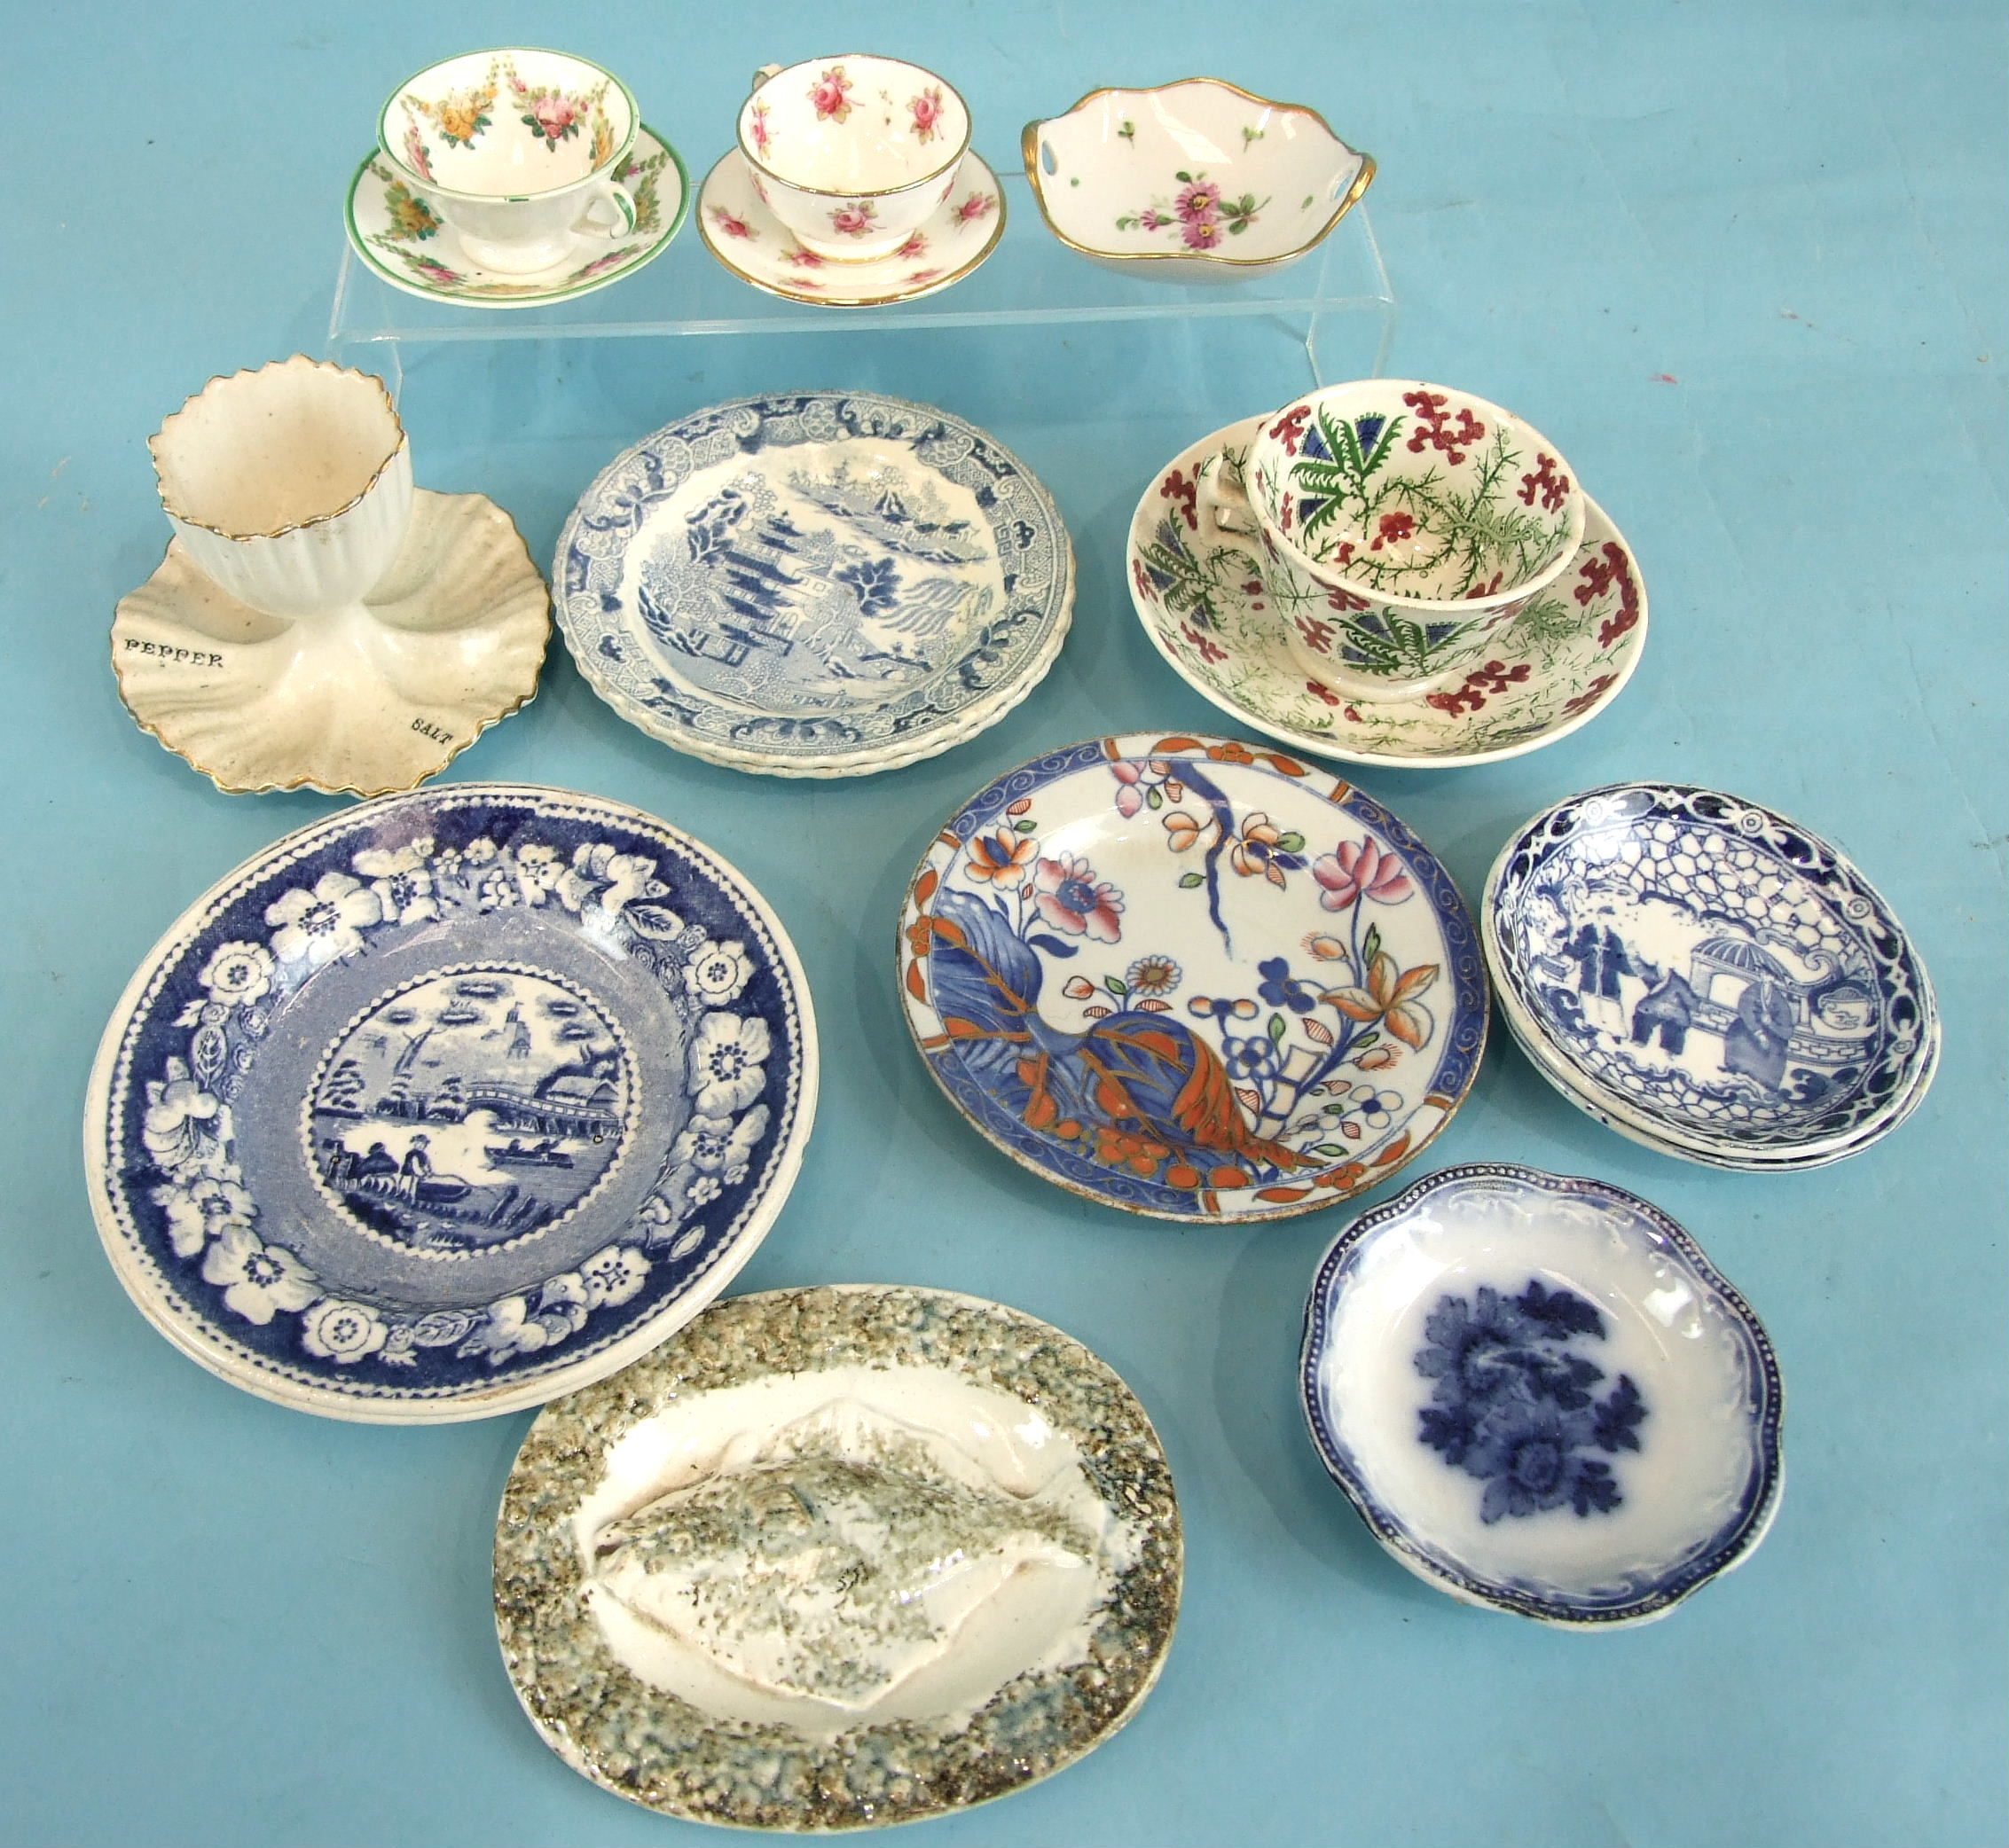 A group of child's plates with willow pattern and other printed decoration, also an egg cup, etc.